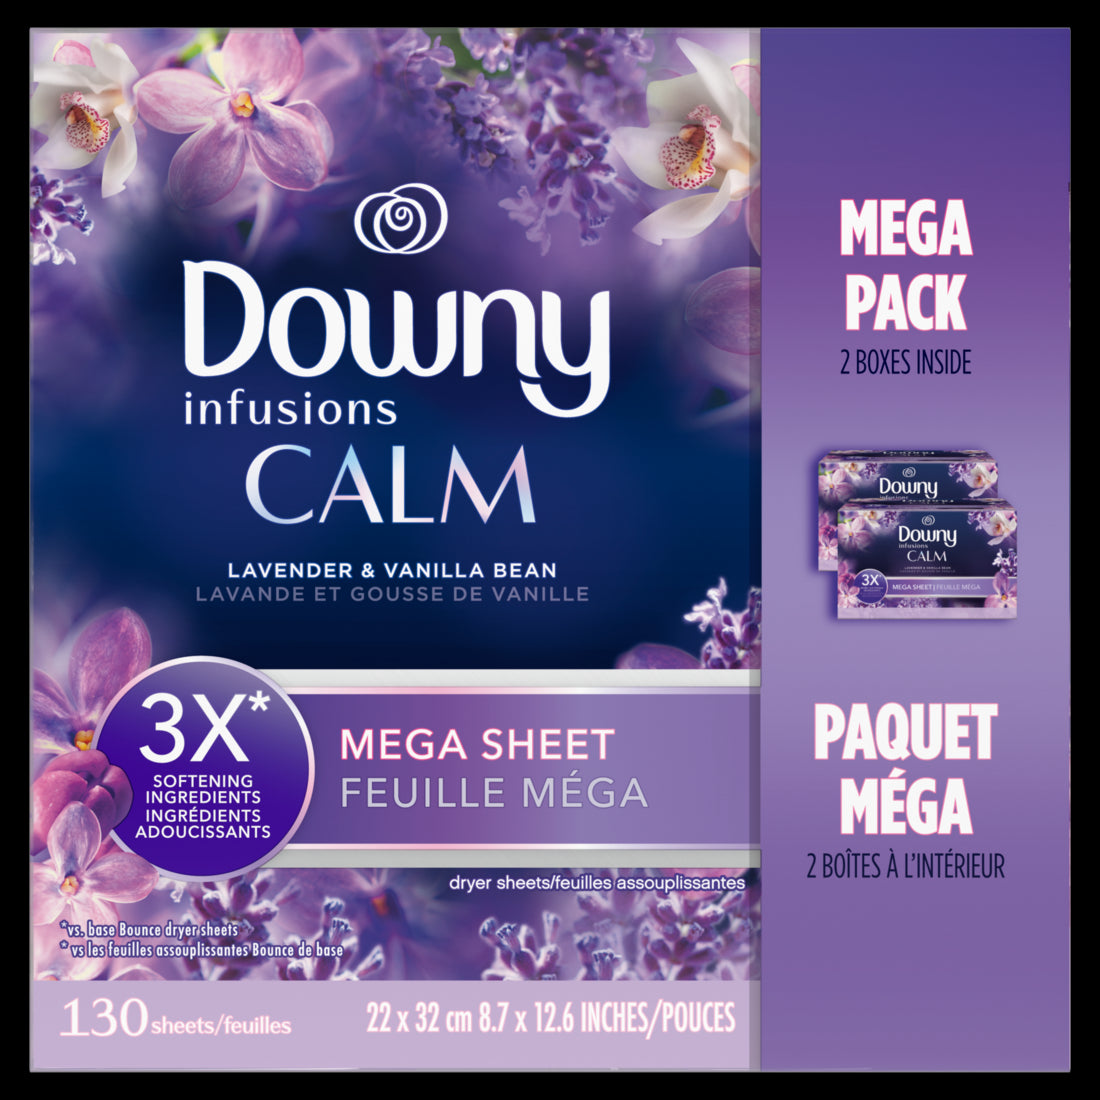 Downy Infusions Mega Dryer Sheets Laundry Fabric Softener CALM Lavender and Vanilla-130ct/3pk